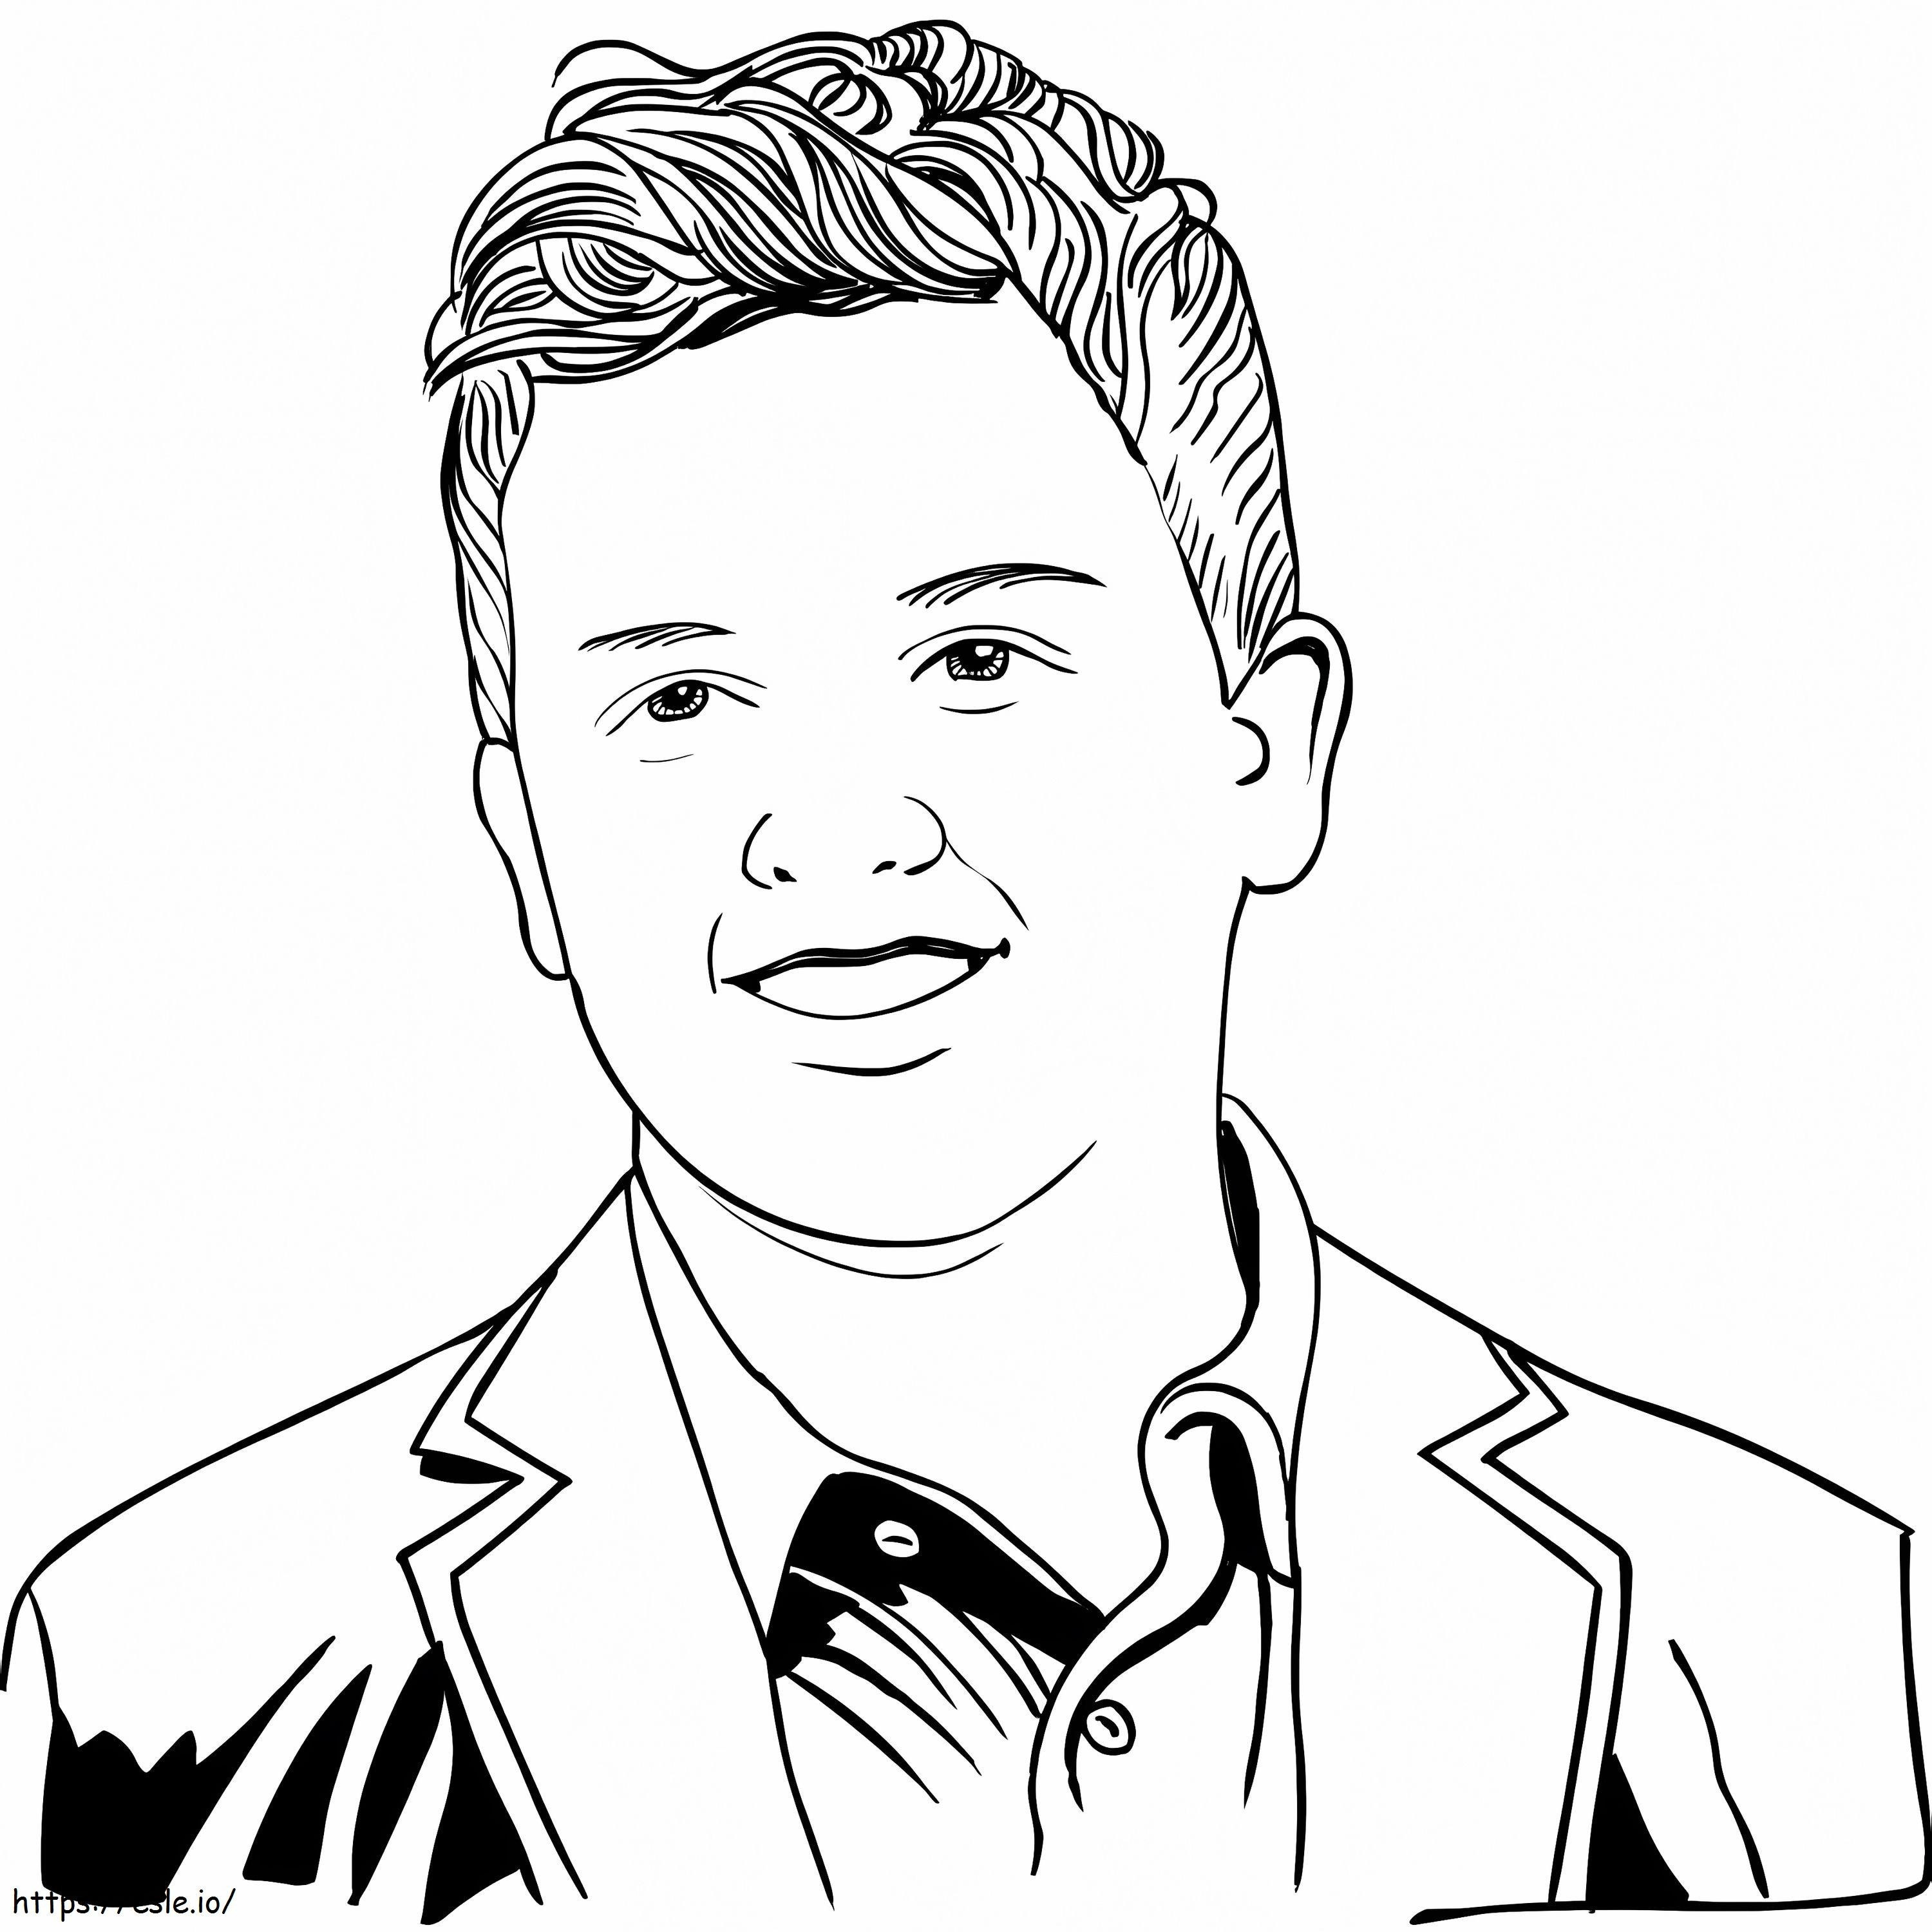 Gibby From ICarly coloring page